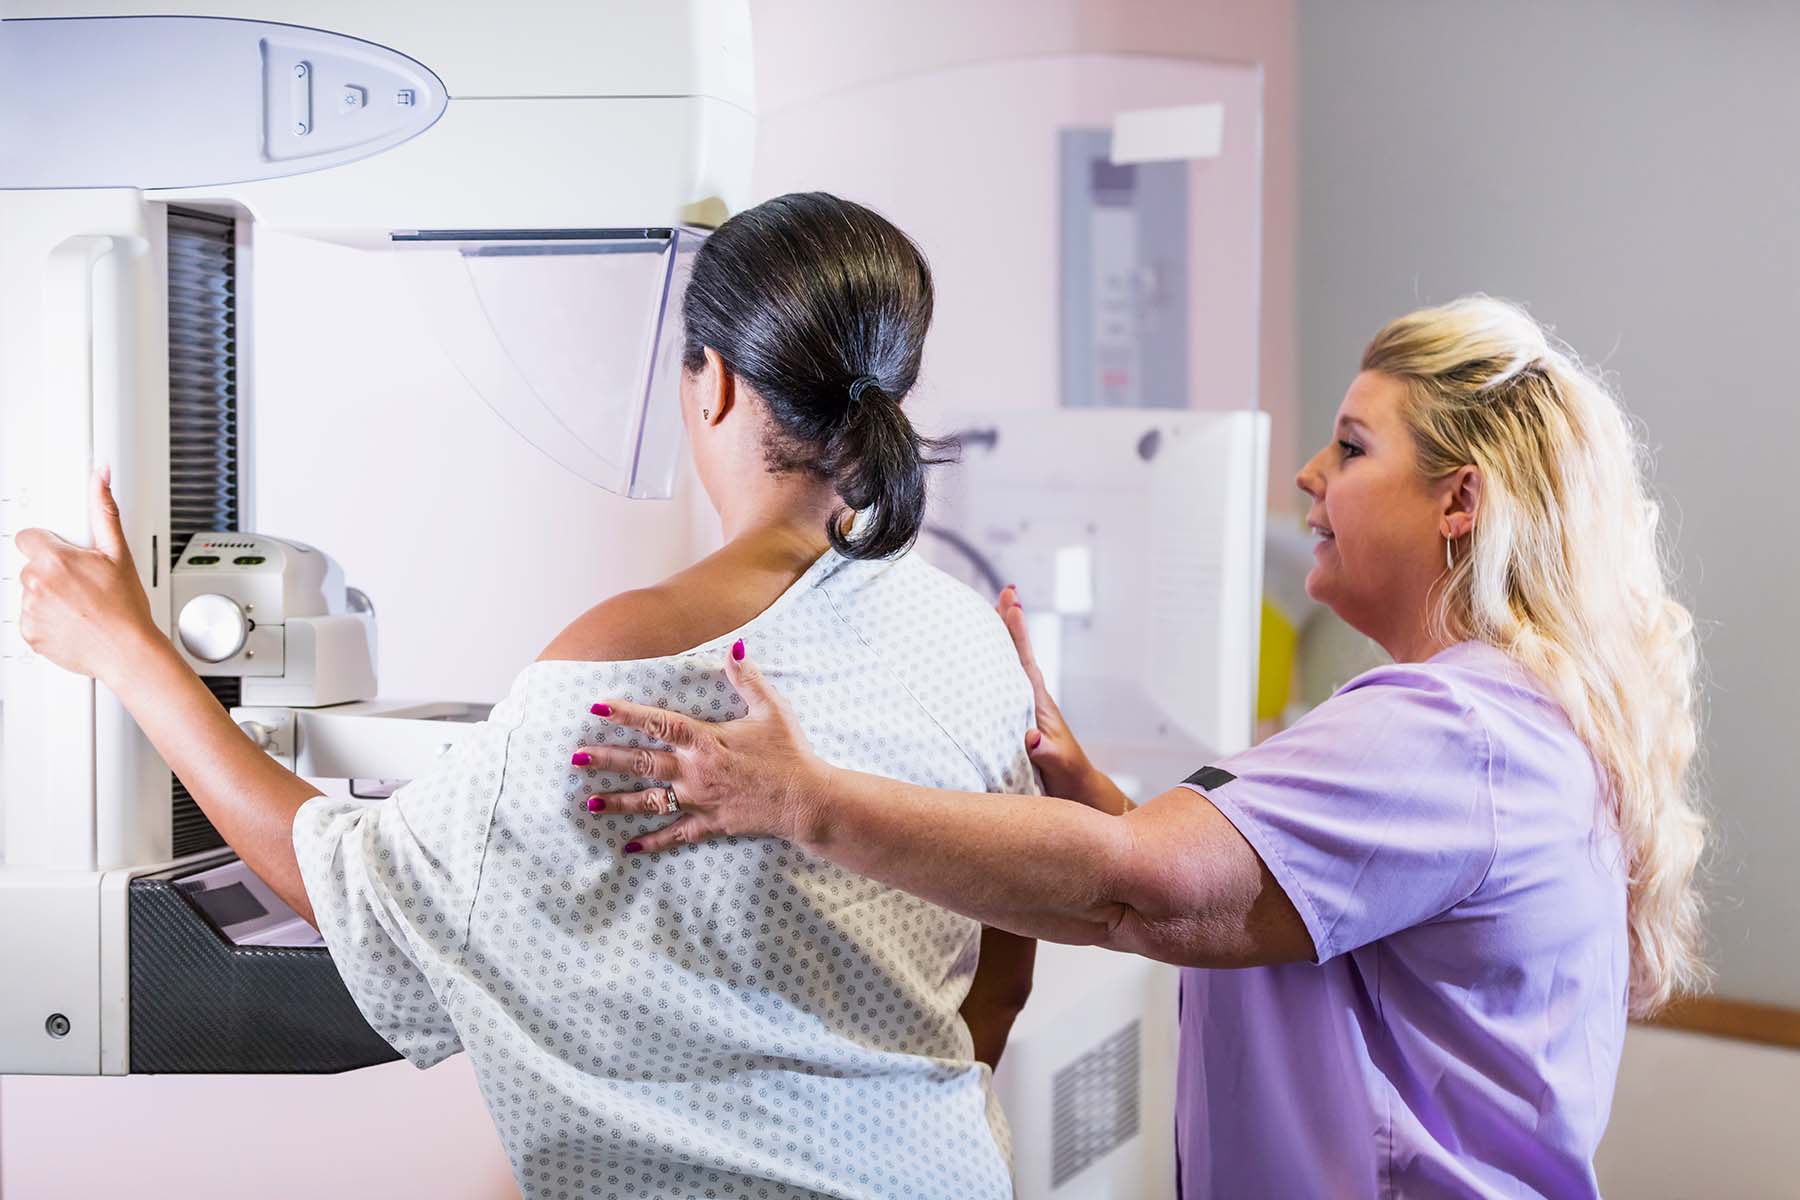 Black woman leans into mammogram tool while nurse assists.